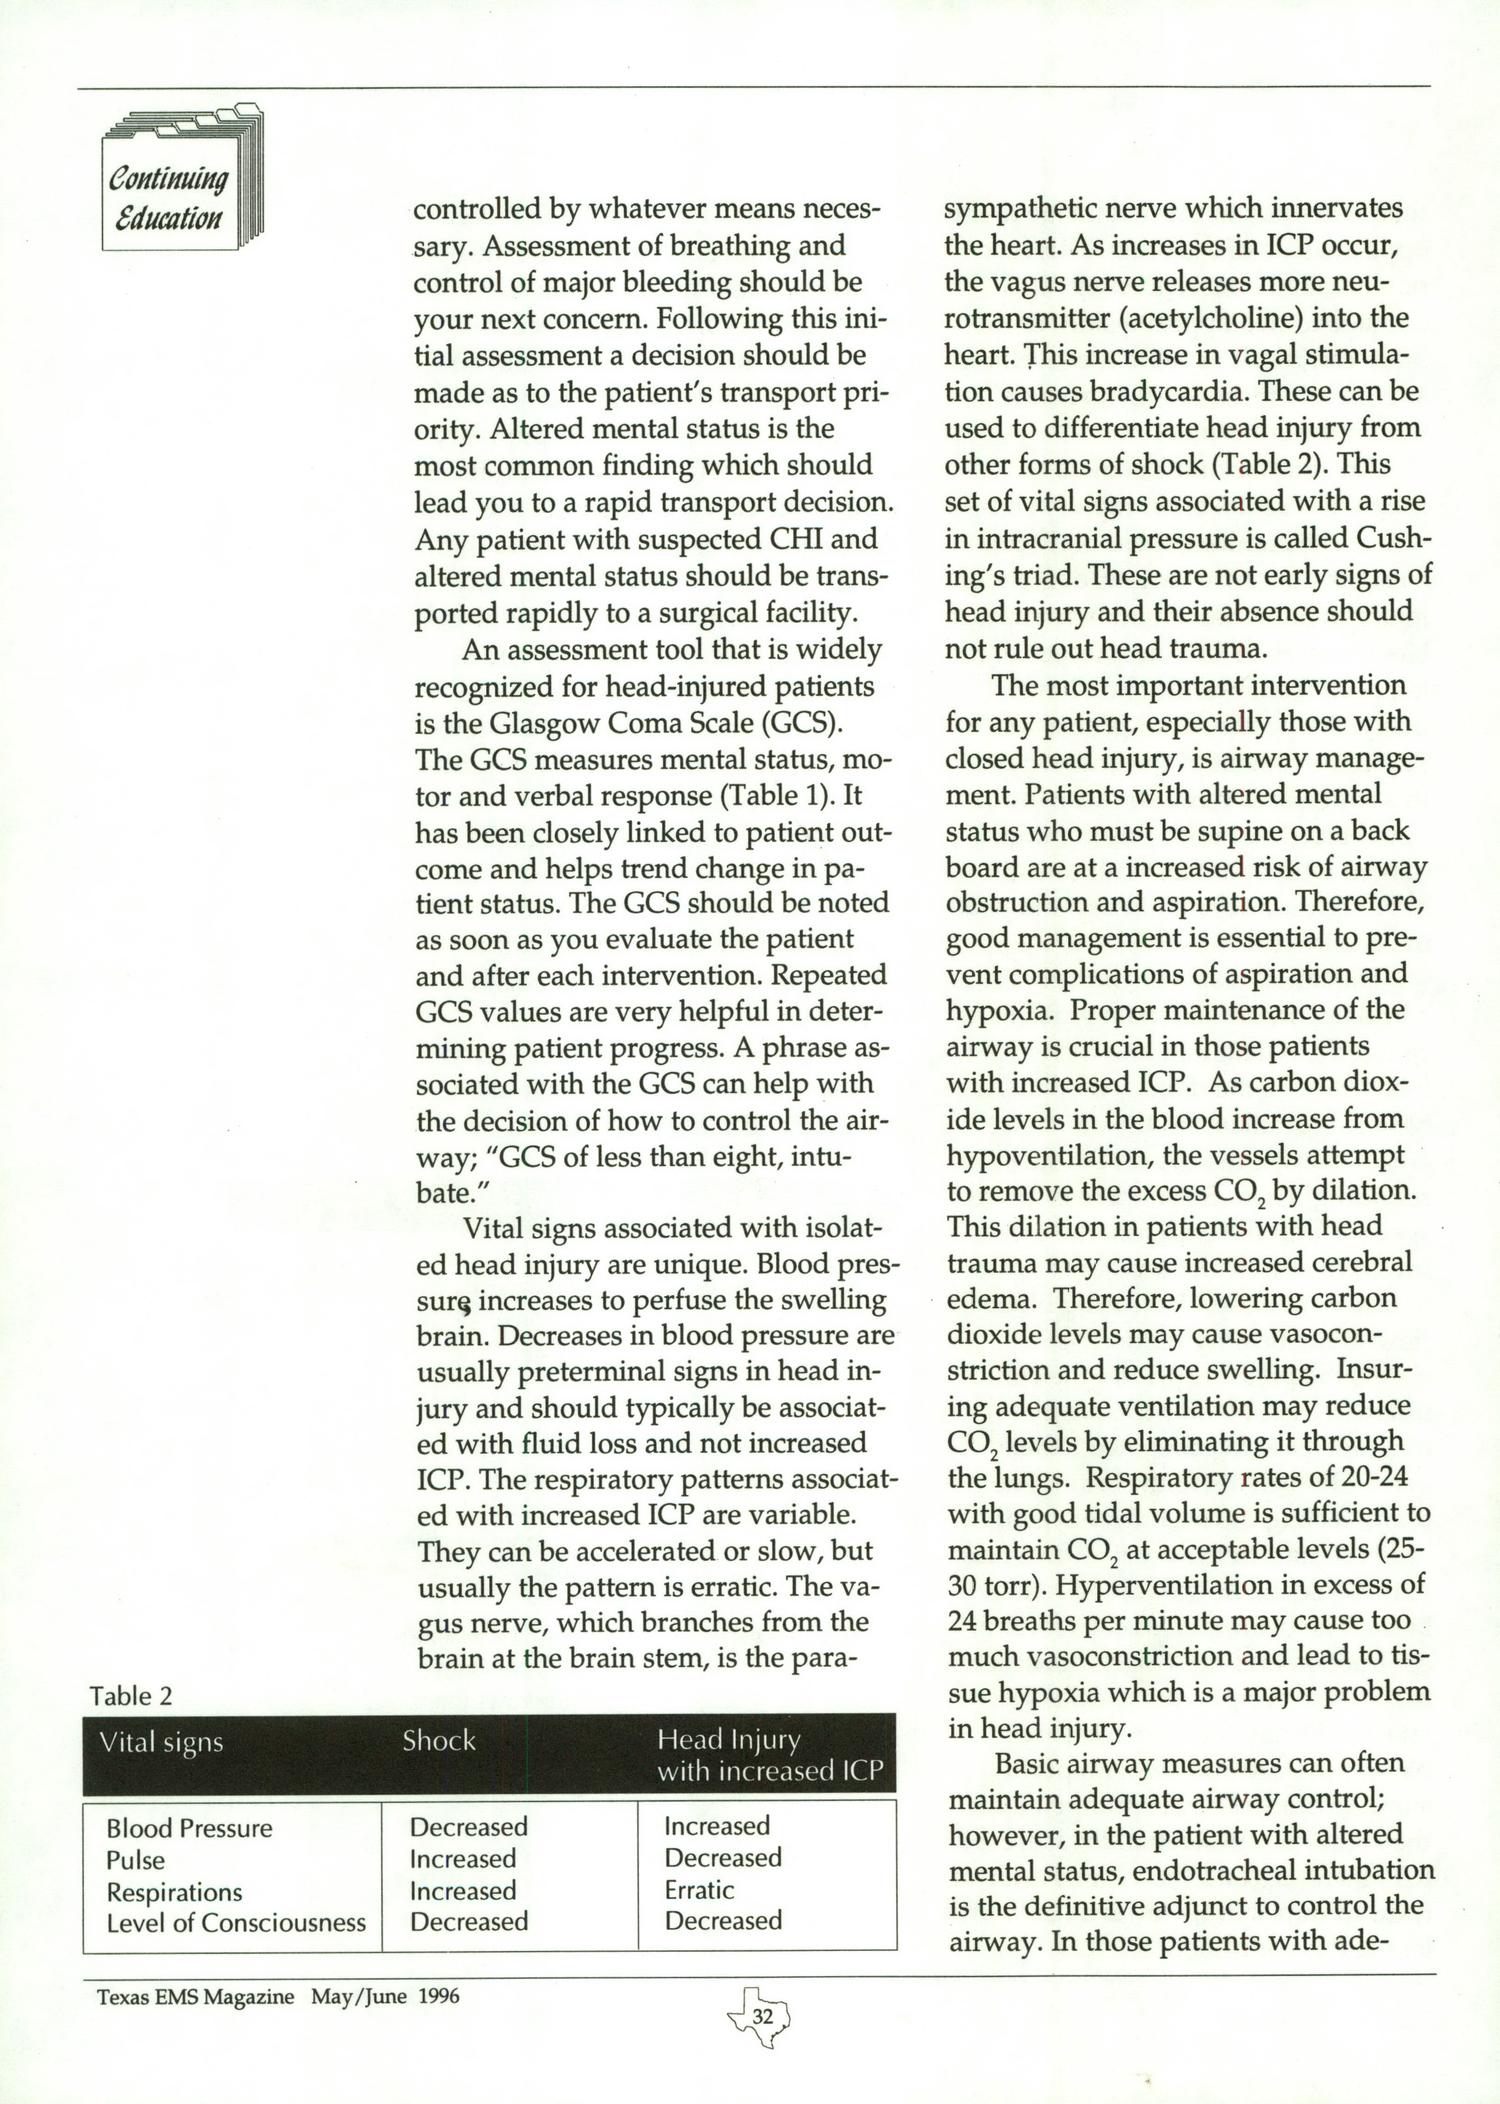 Texas EMS Magazine, Volume 17, Number 3, May/June 1996
                                                
                                                    32
                                                